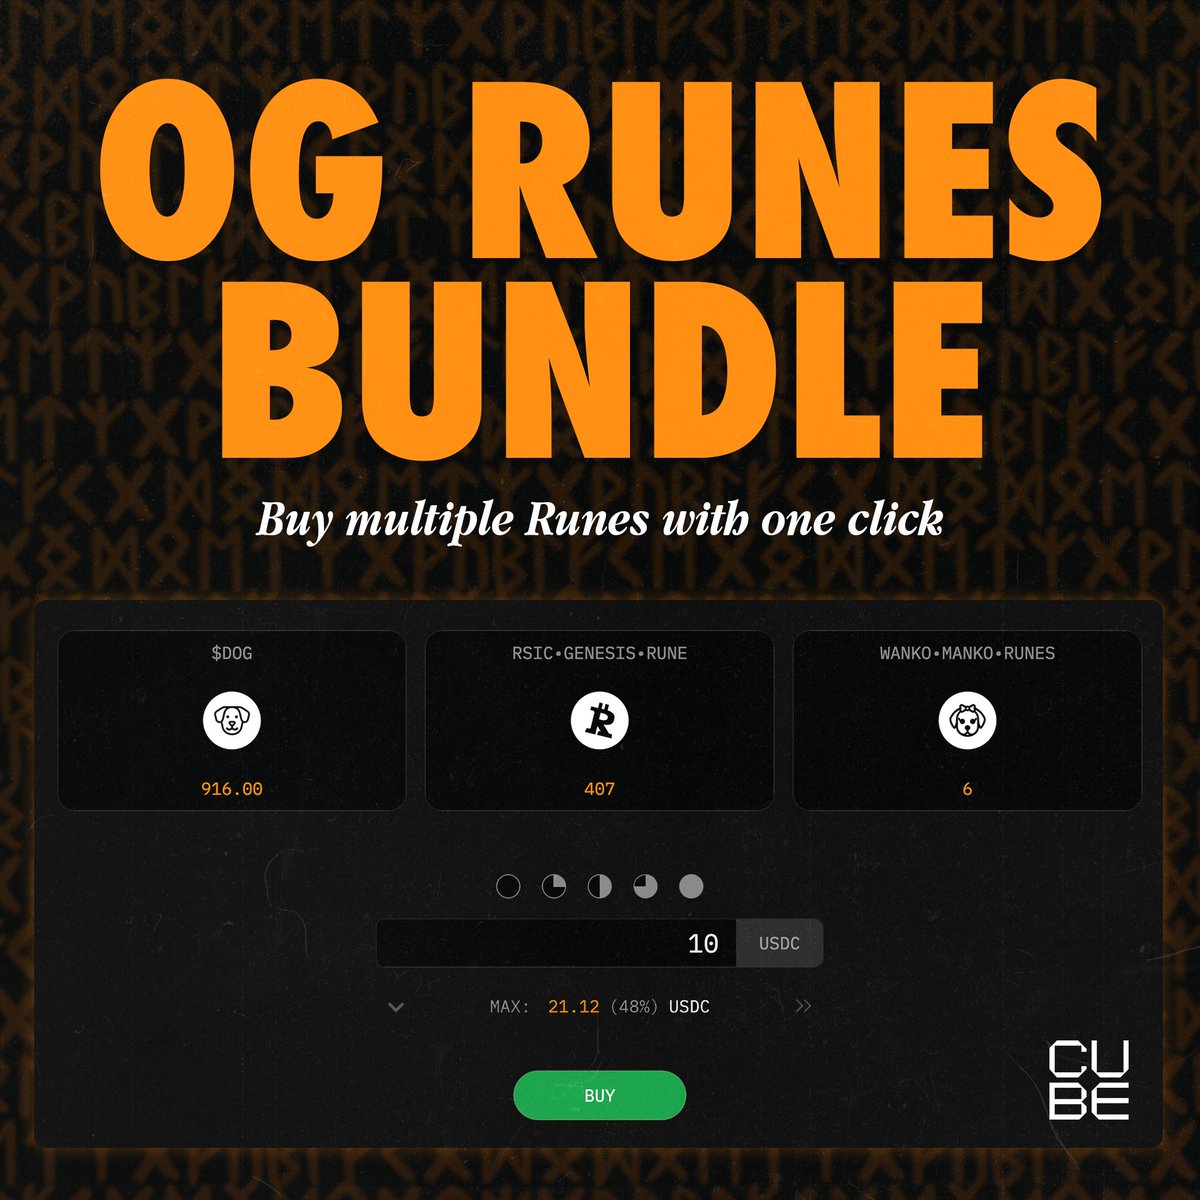 OG Runes Bundle - Buy multiple Runes with one click! Exclusively on Cube. 🧊